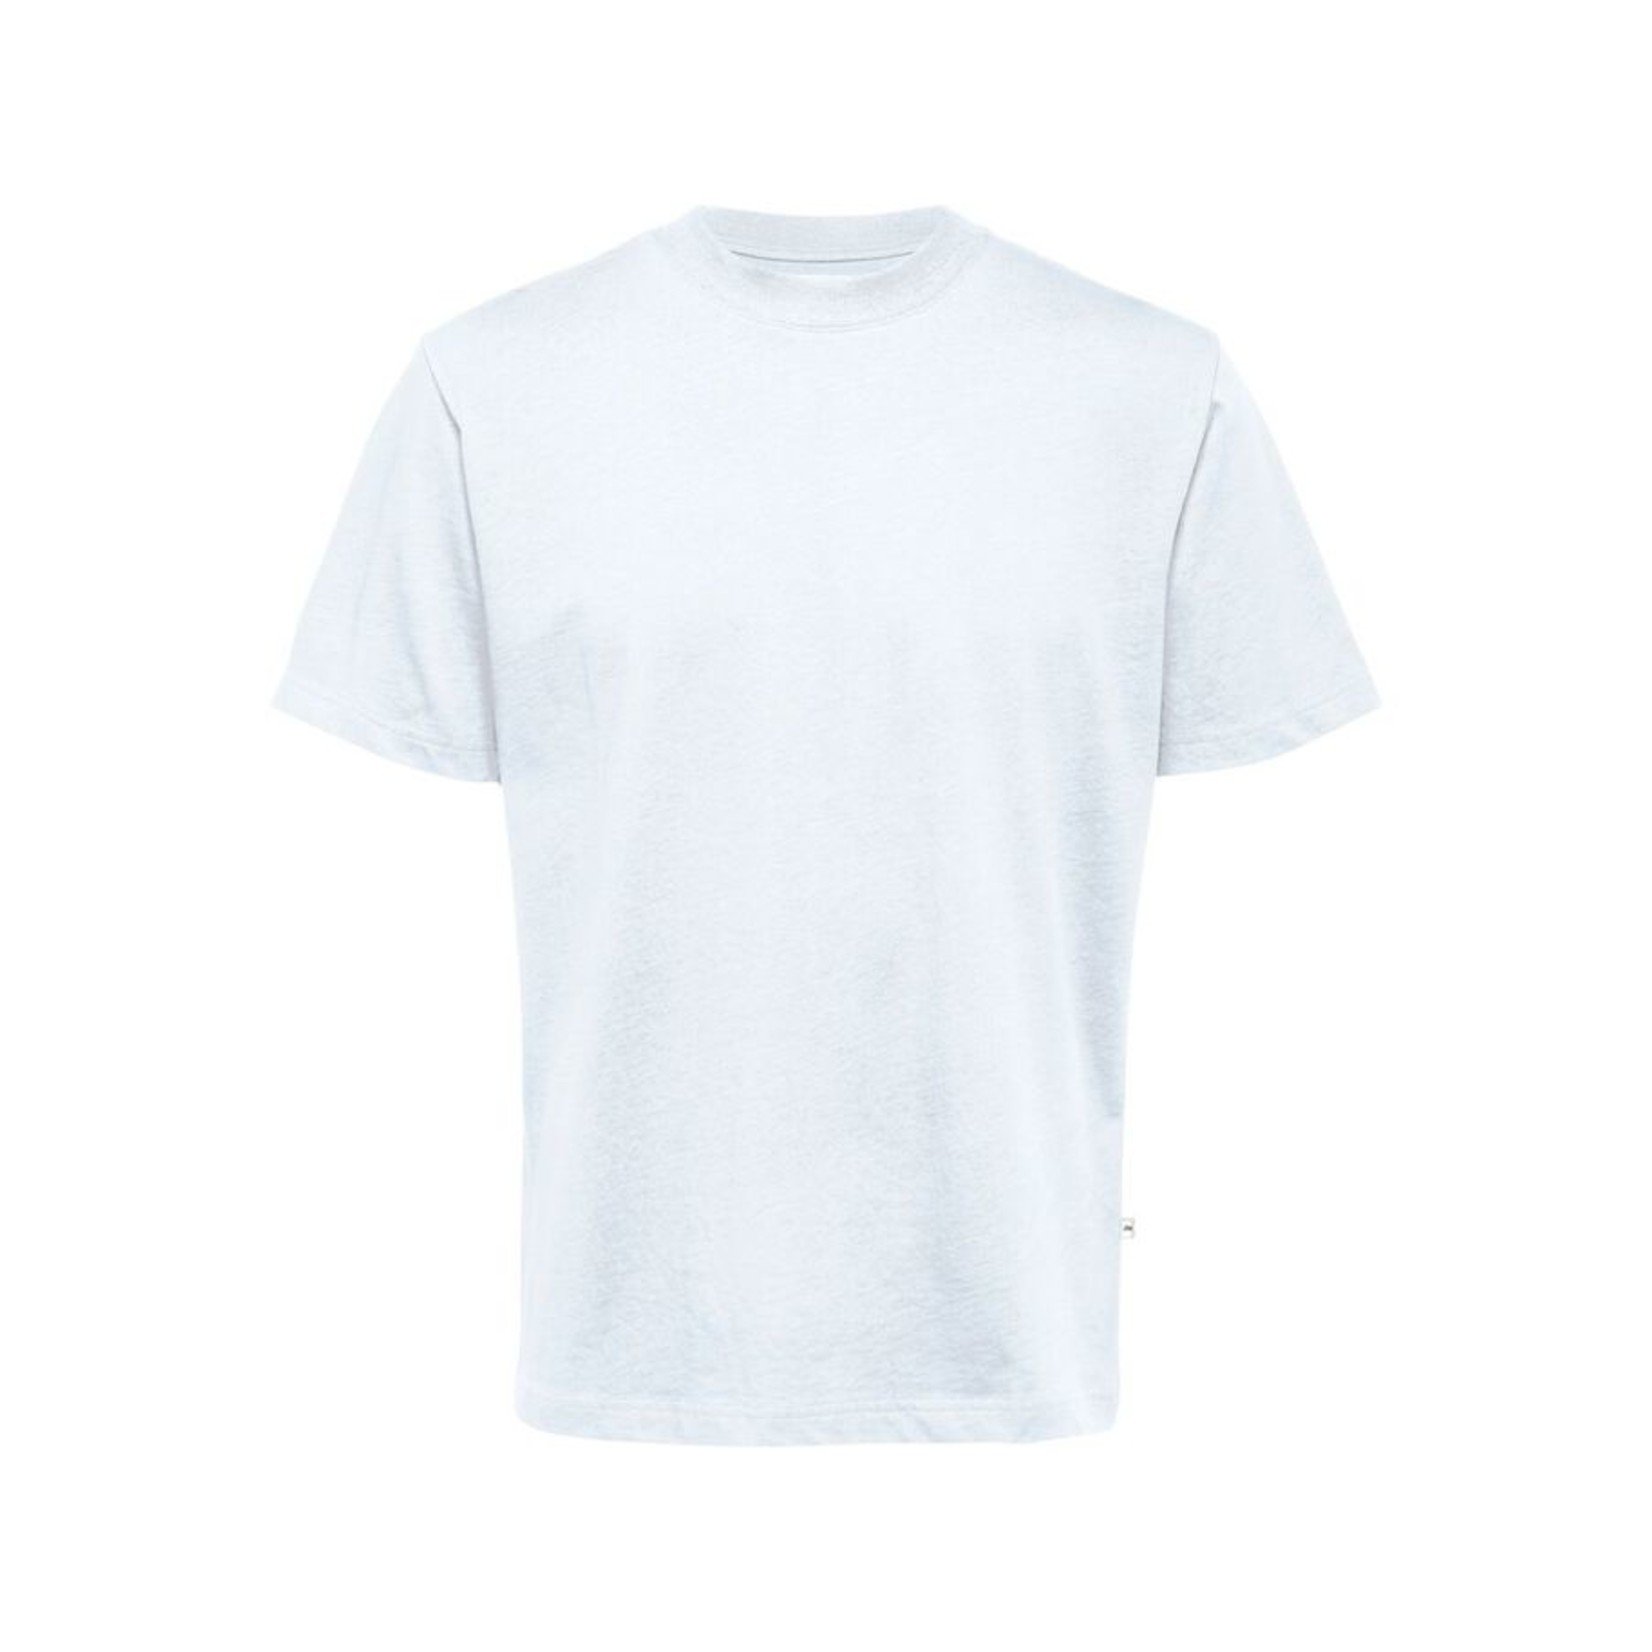 Selected Homme Selected Homme 1607738 Colman Relaxed Tee - Bright White